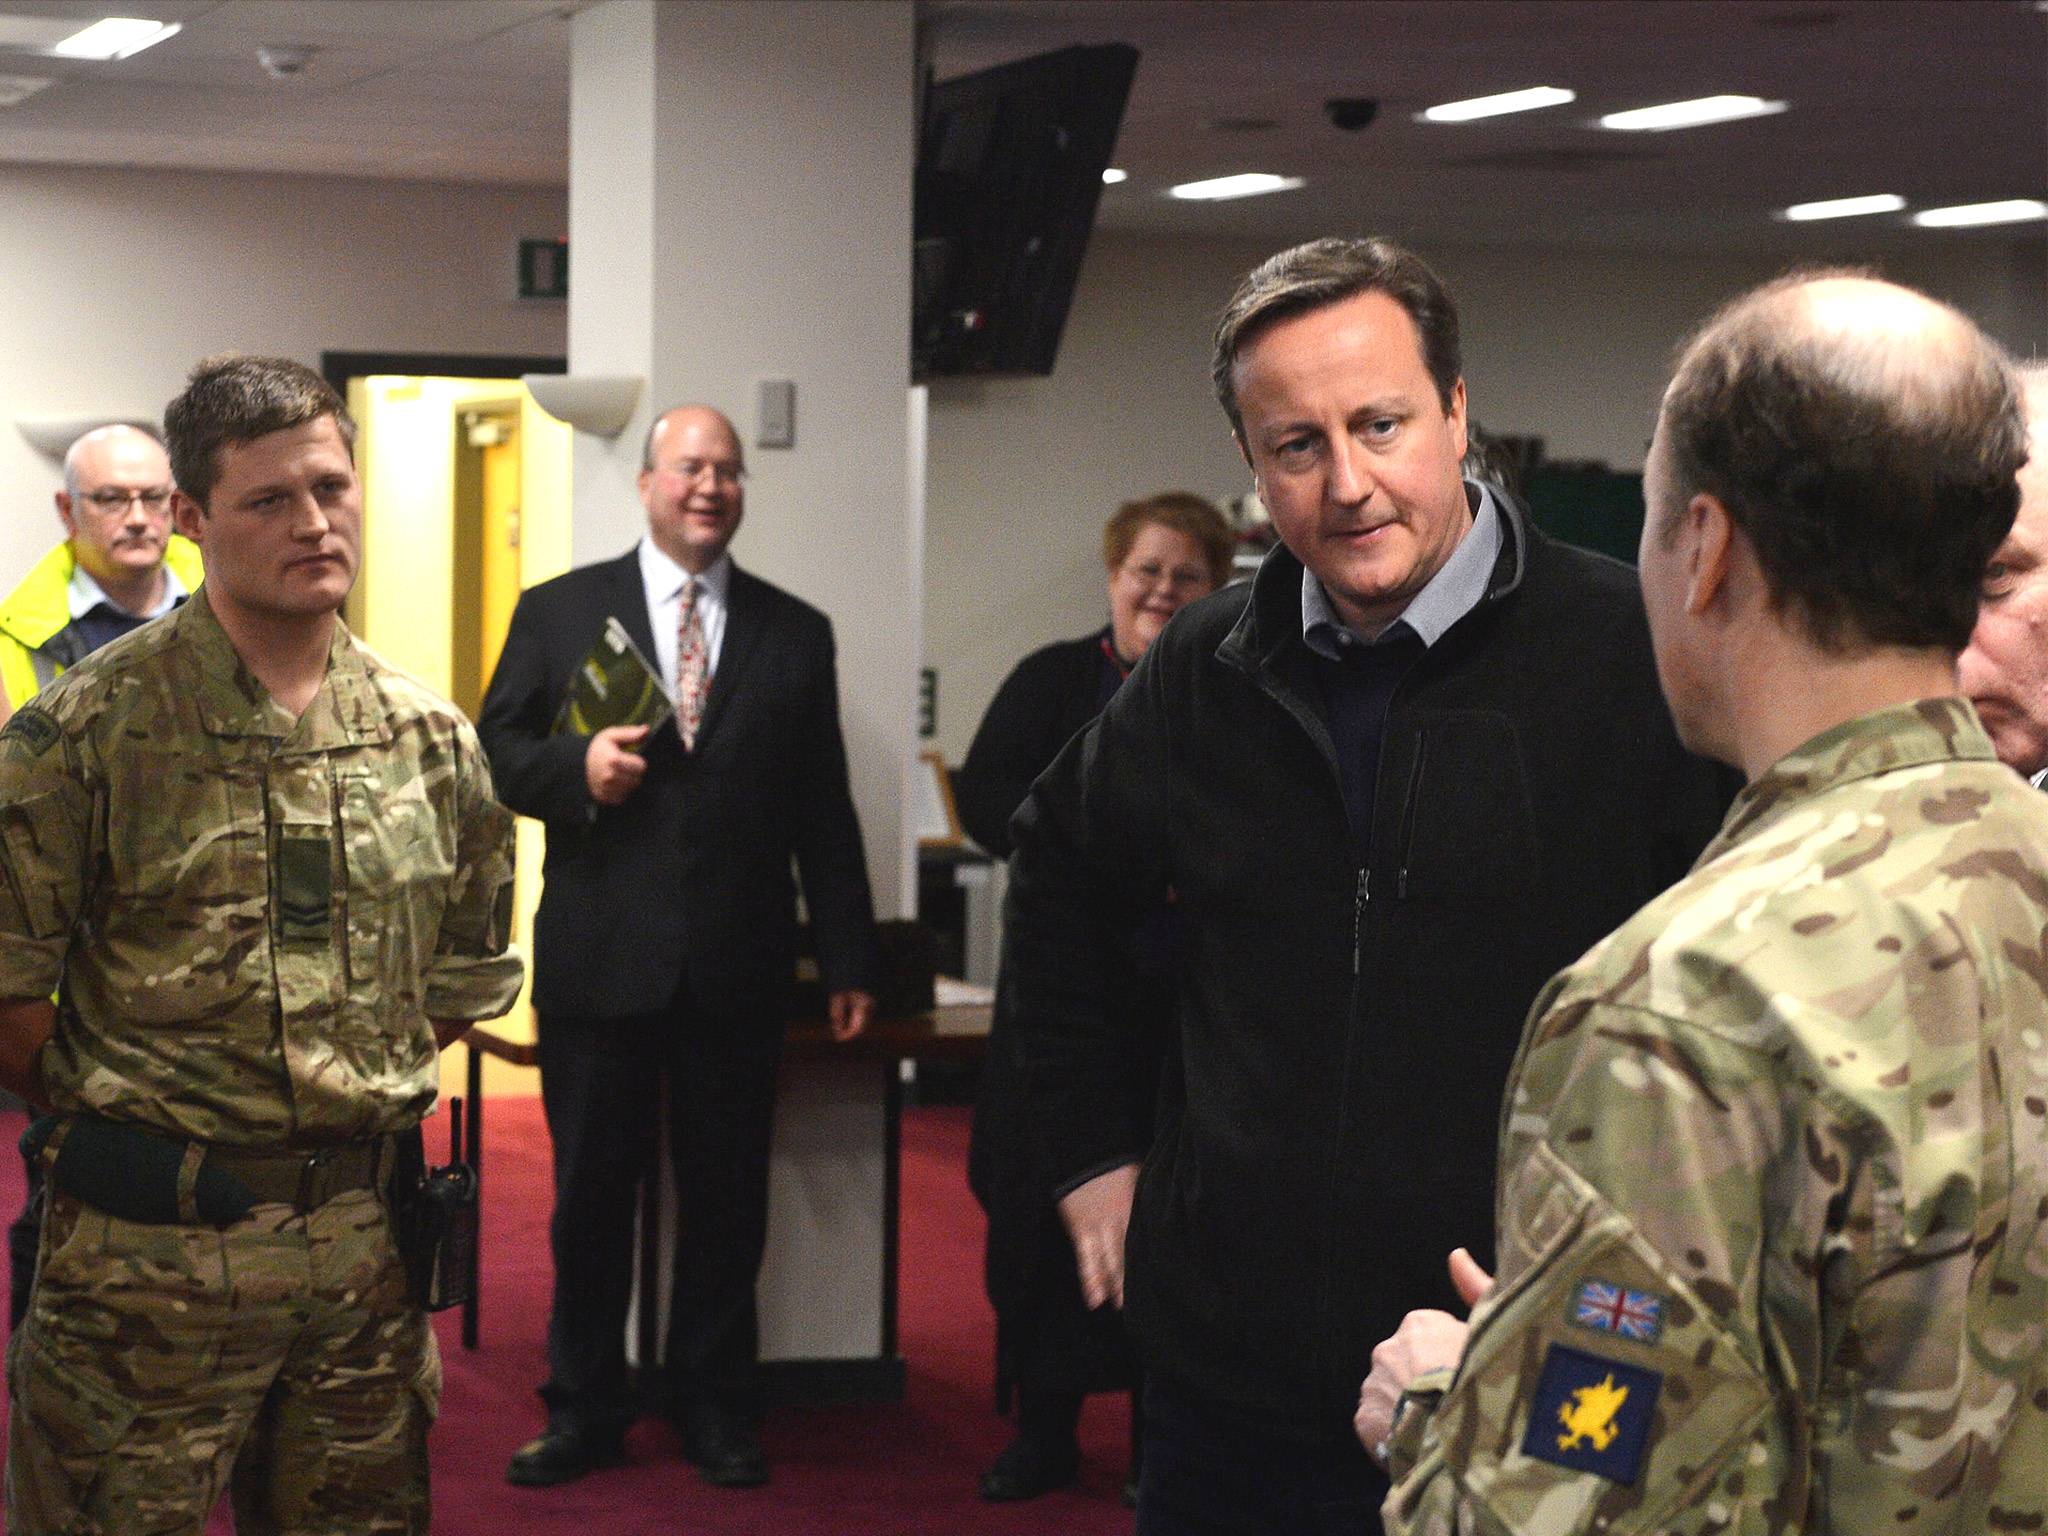 David Cameron with members of 40 Commando Royal Marines involved in relief efforts during his visit to Taunton last Friday